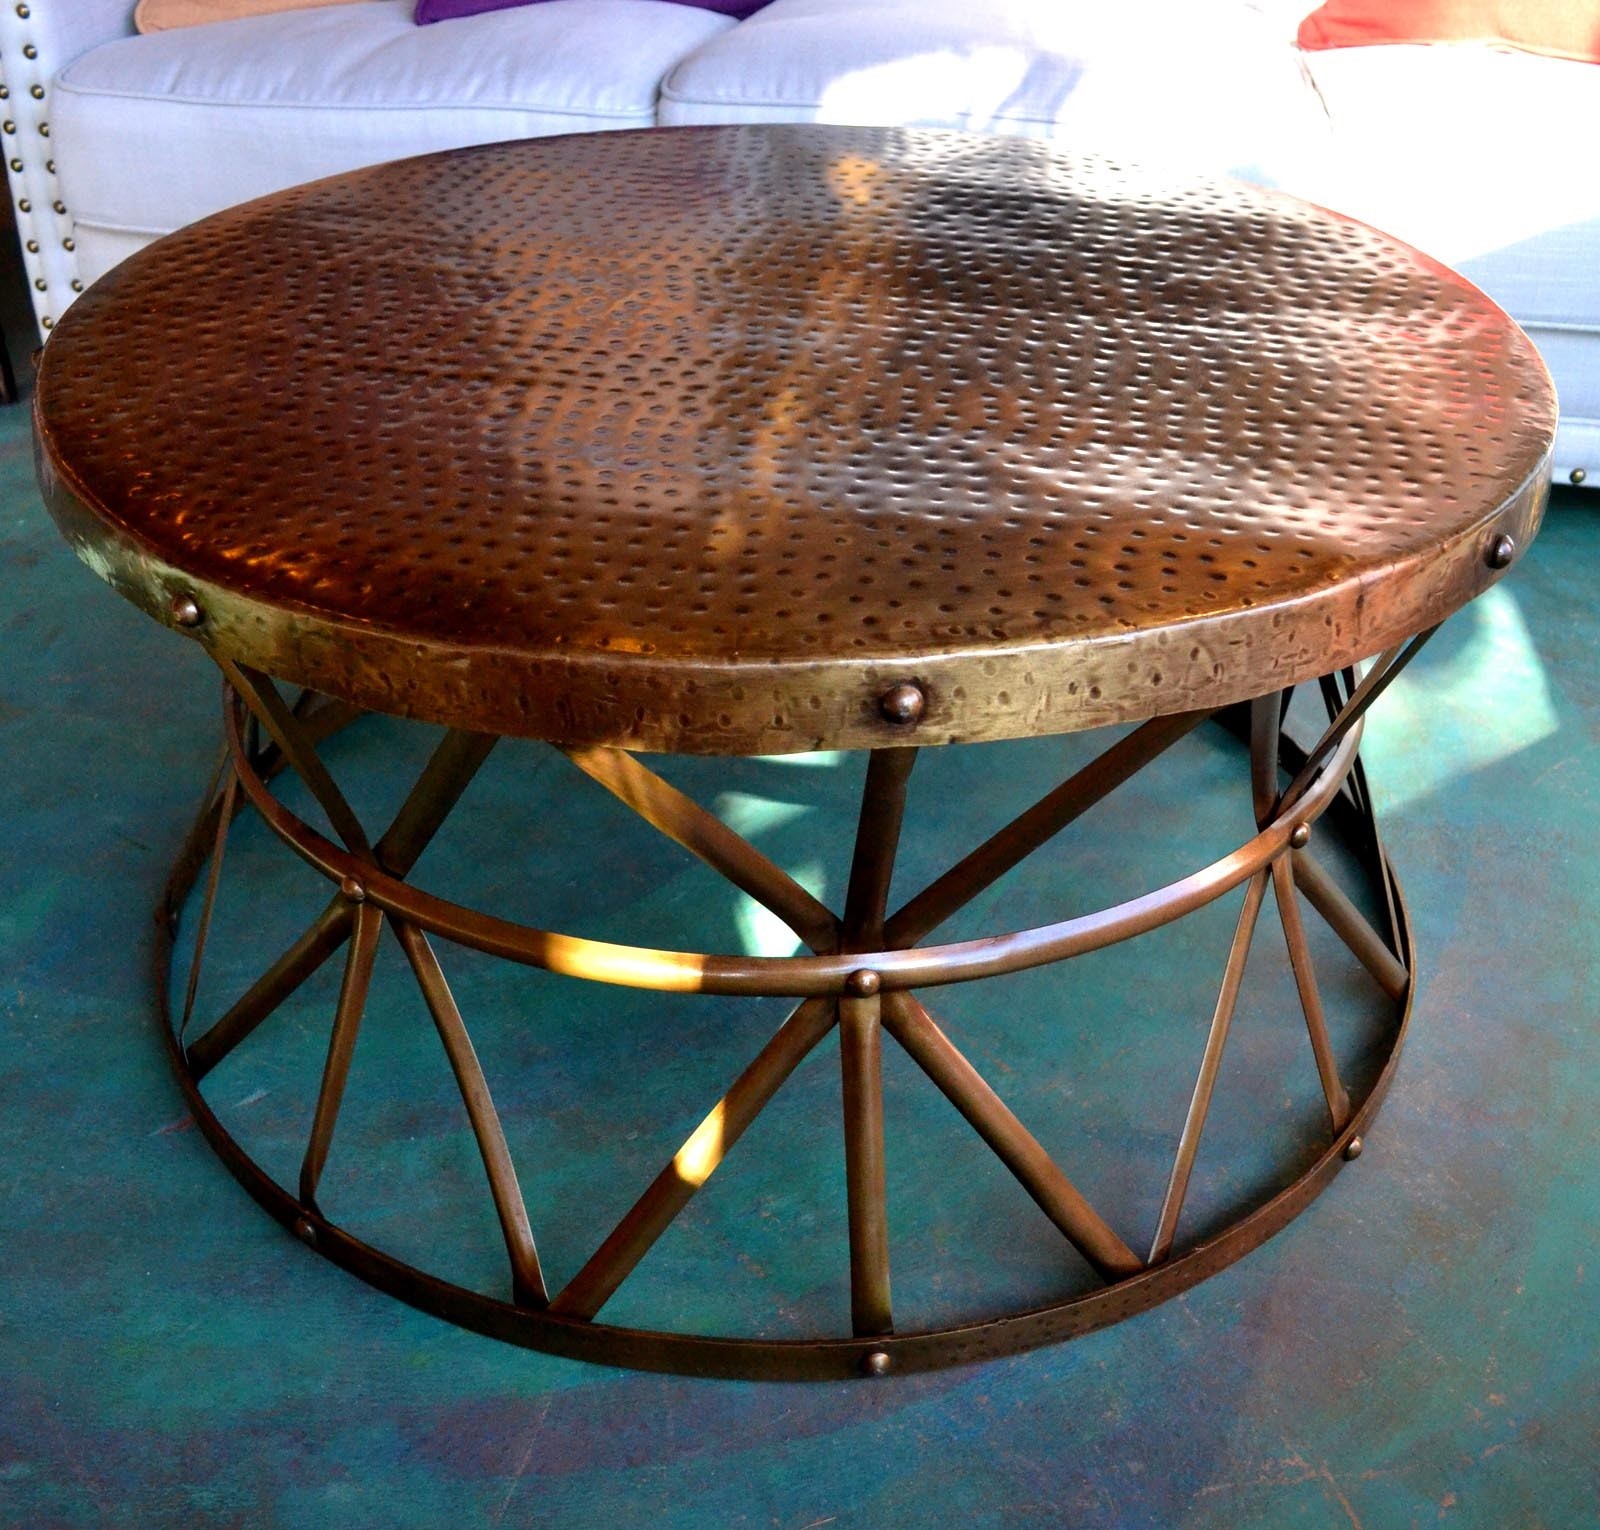 Hammered copper coffee table coffee table design ideas